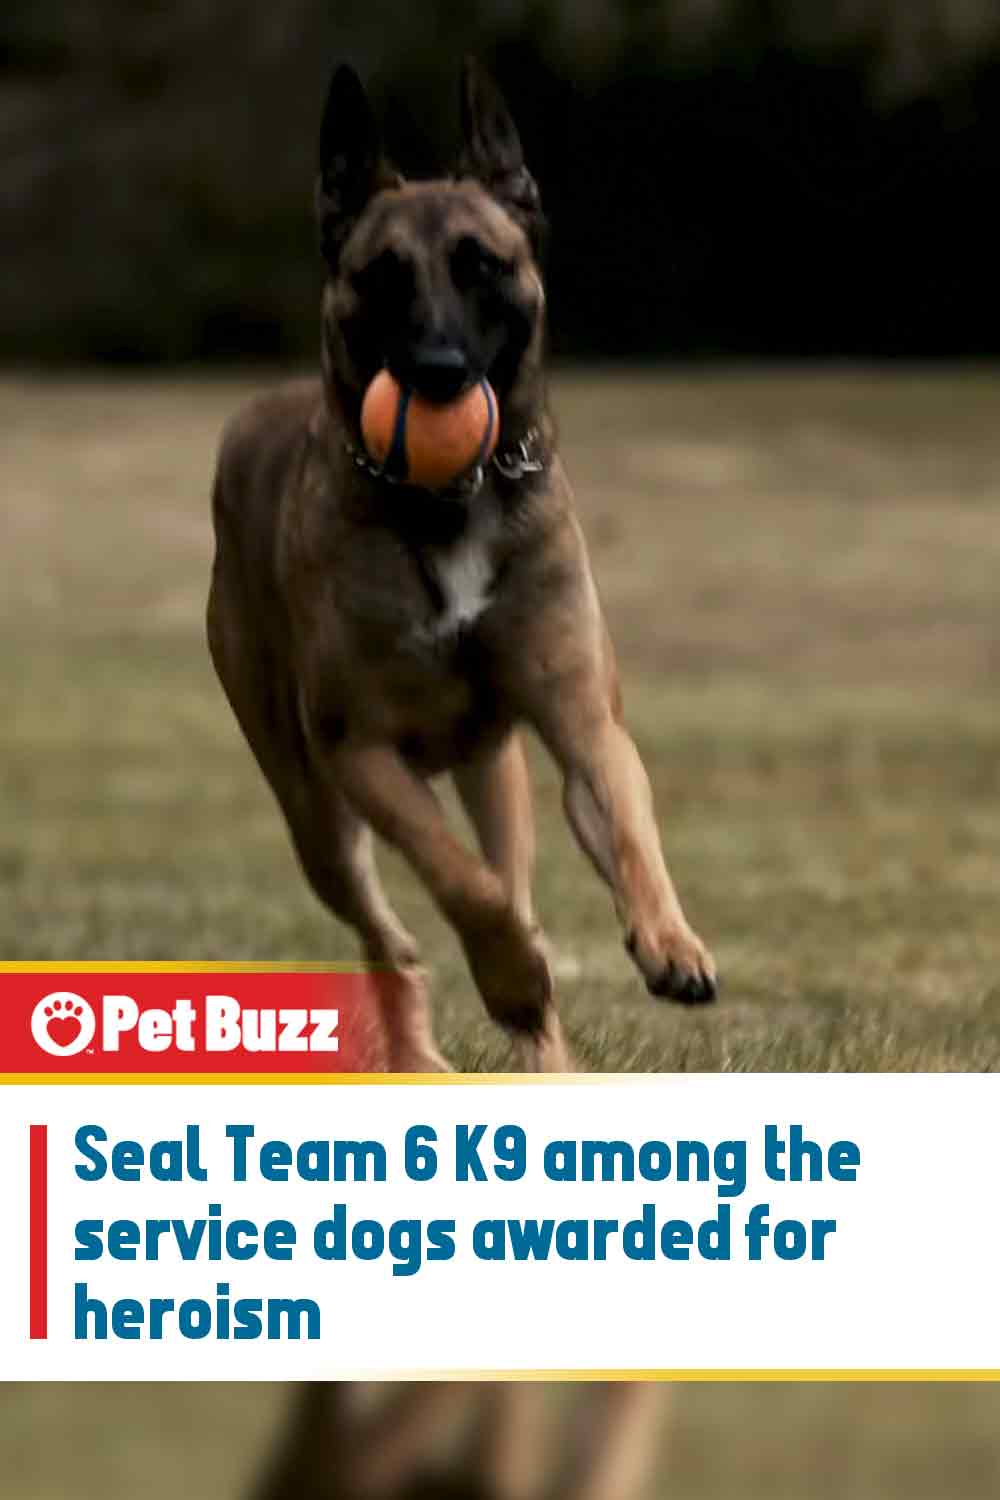 Seal Team 6 K9 among the service dogs awarded for heroism